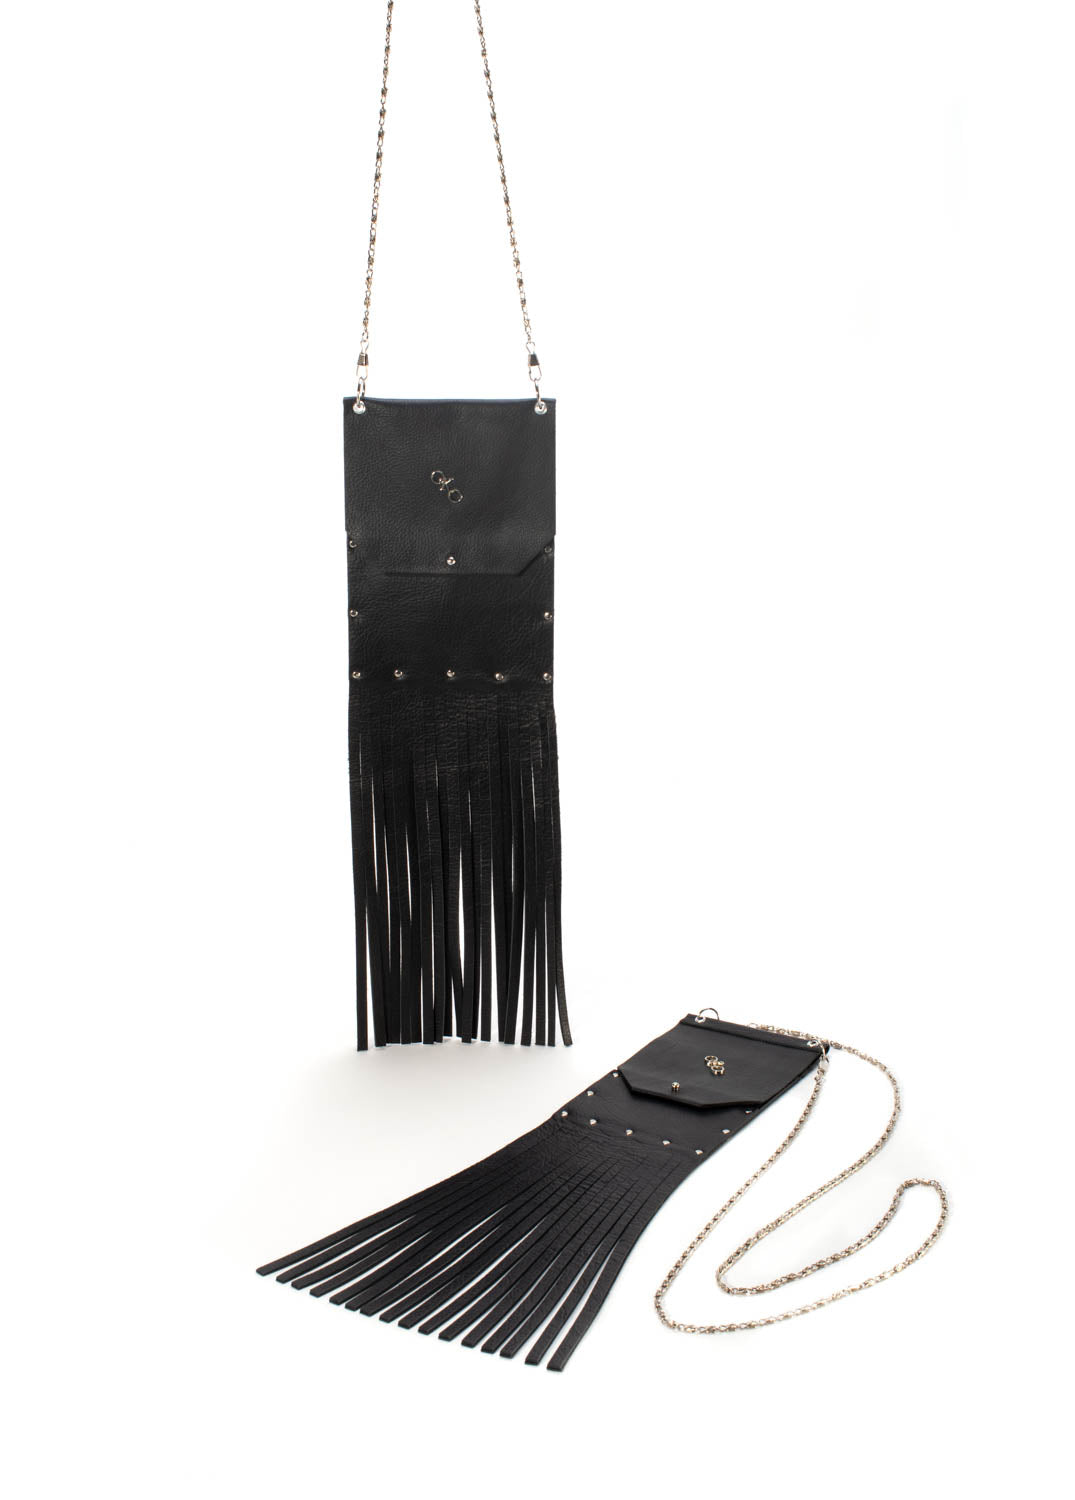 "Urban Chic" cell phone pouch with fringe.-handmade leather bags-handcrafted leather-unique design bag-luxury leather bag-stylish bag-OKOhandbags